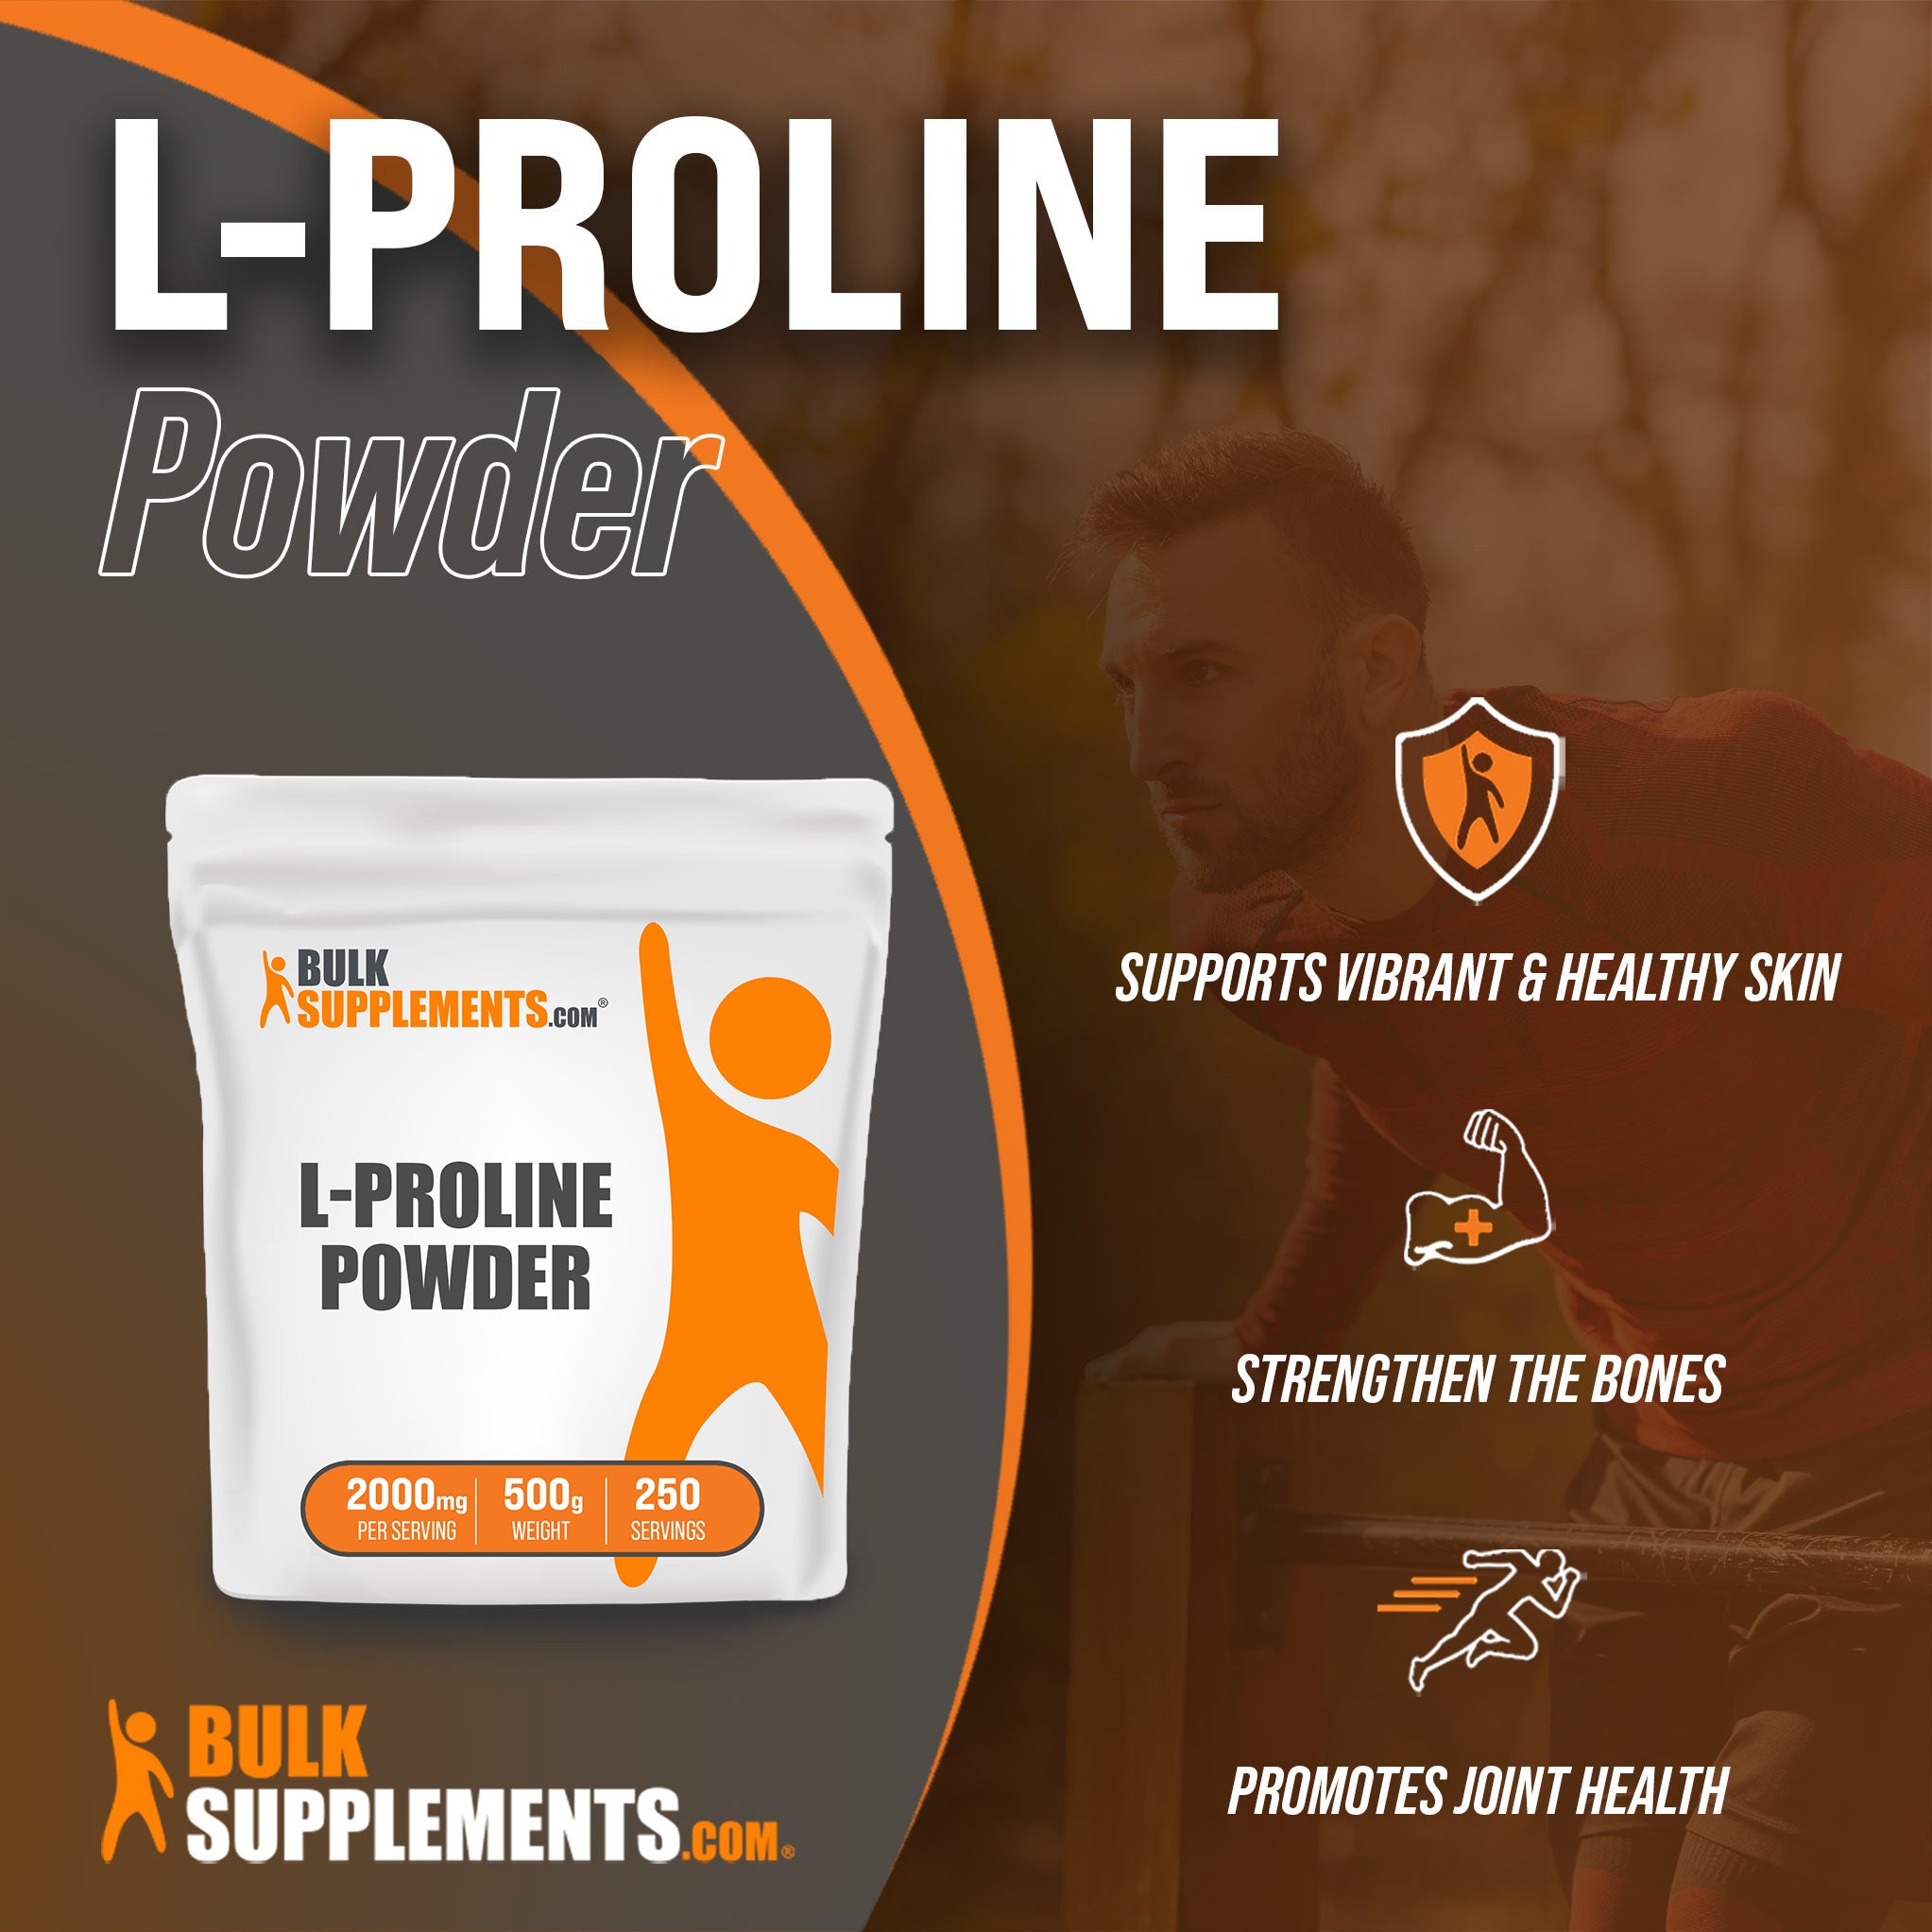 Benefits of L-Proline: supports vibrant and healthy skin, strengthen the bones, promotes joint health